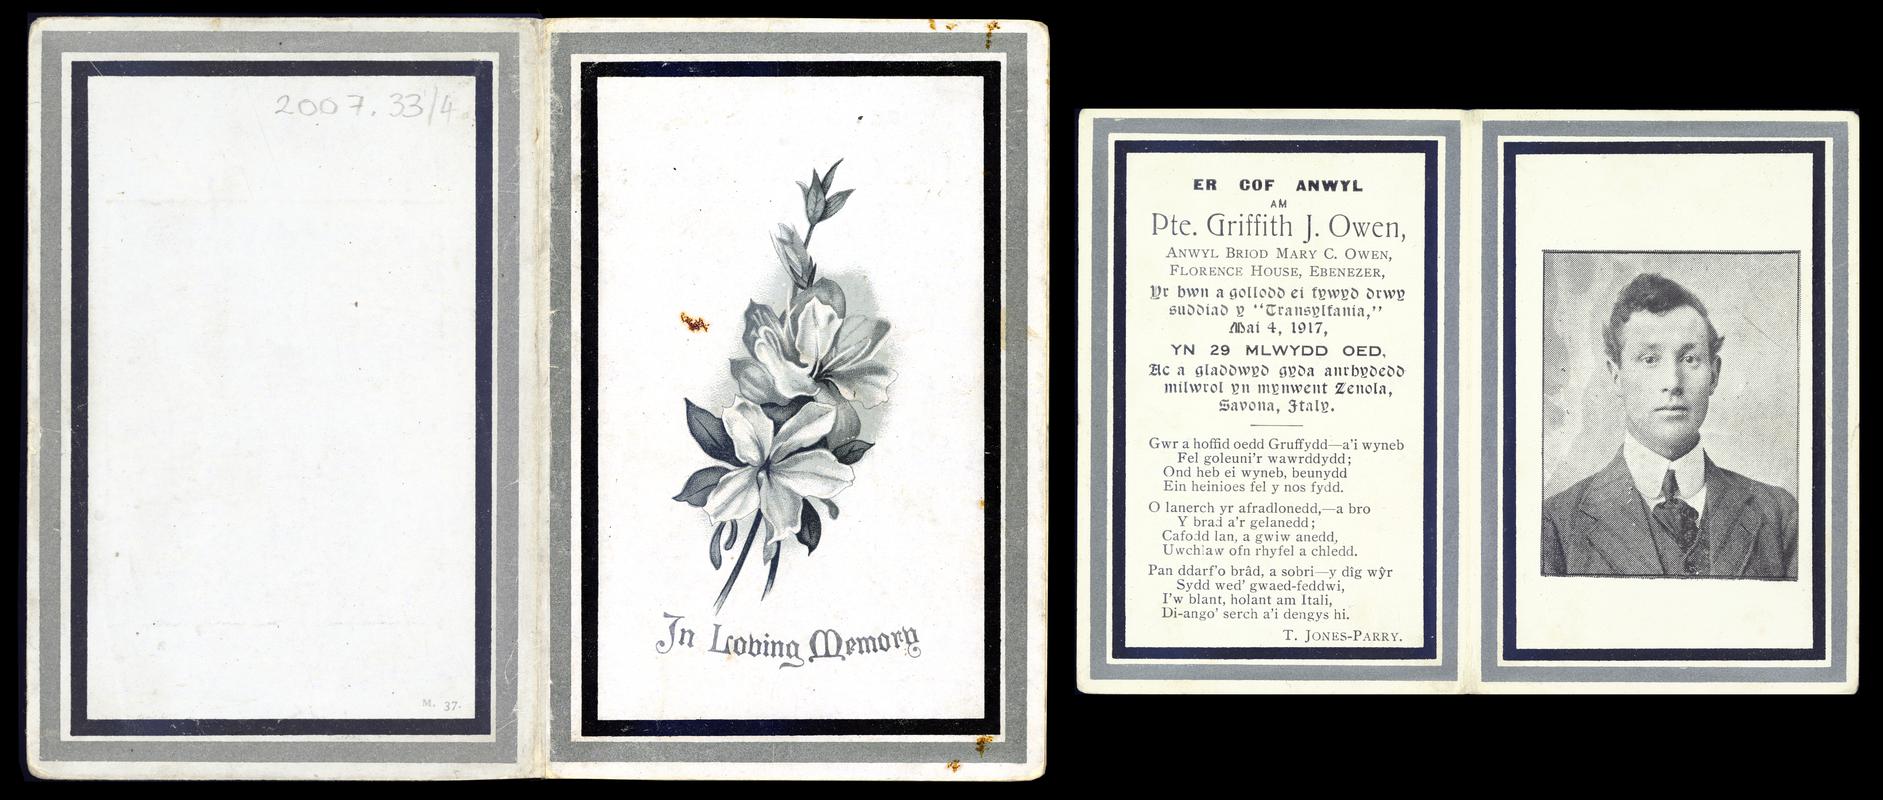 Memorial card for Pte. Griffith J. Owen who died during the First World War on 4th May 1917, aged 29, and buried in Zenola Cemetery, Savona, Italy (front & Back)